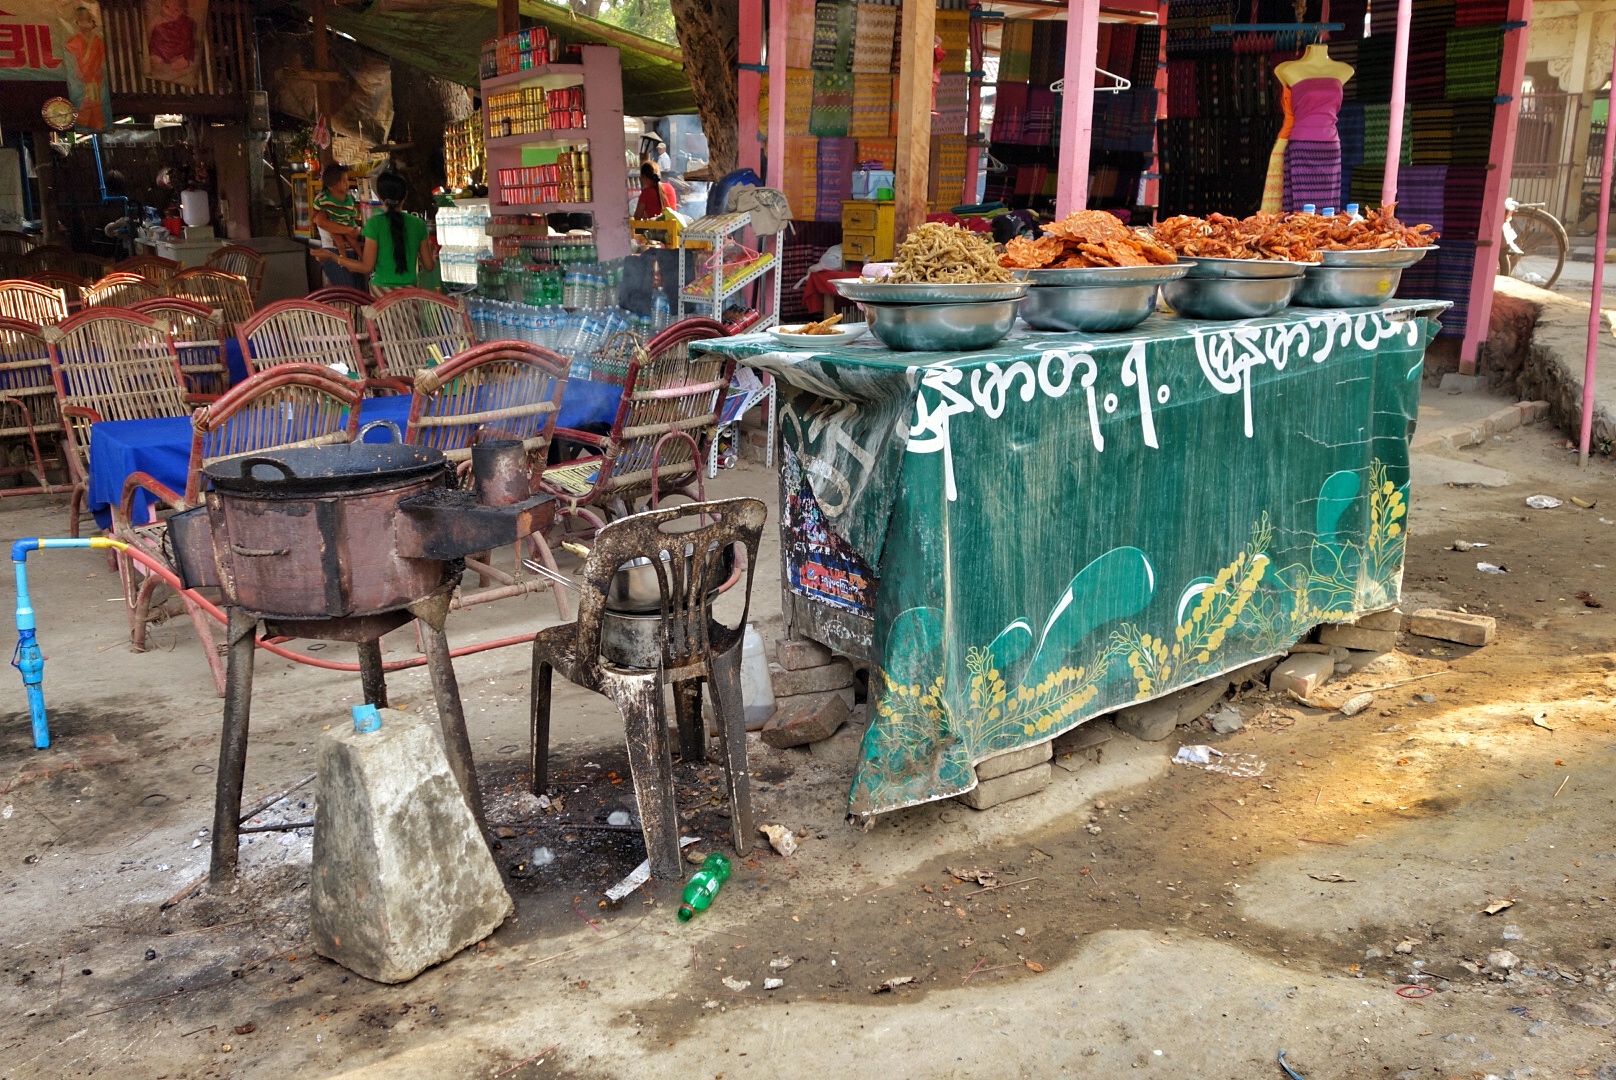 a fruit stand in a market with various chairs